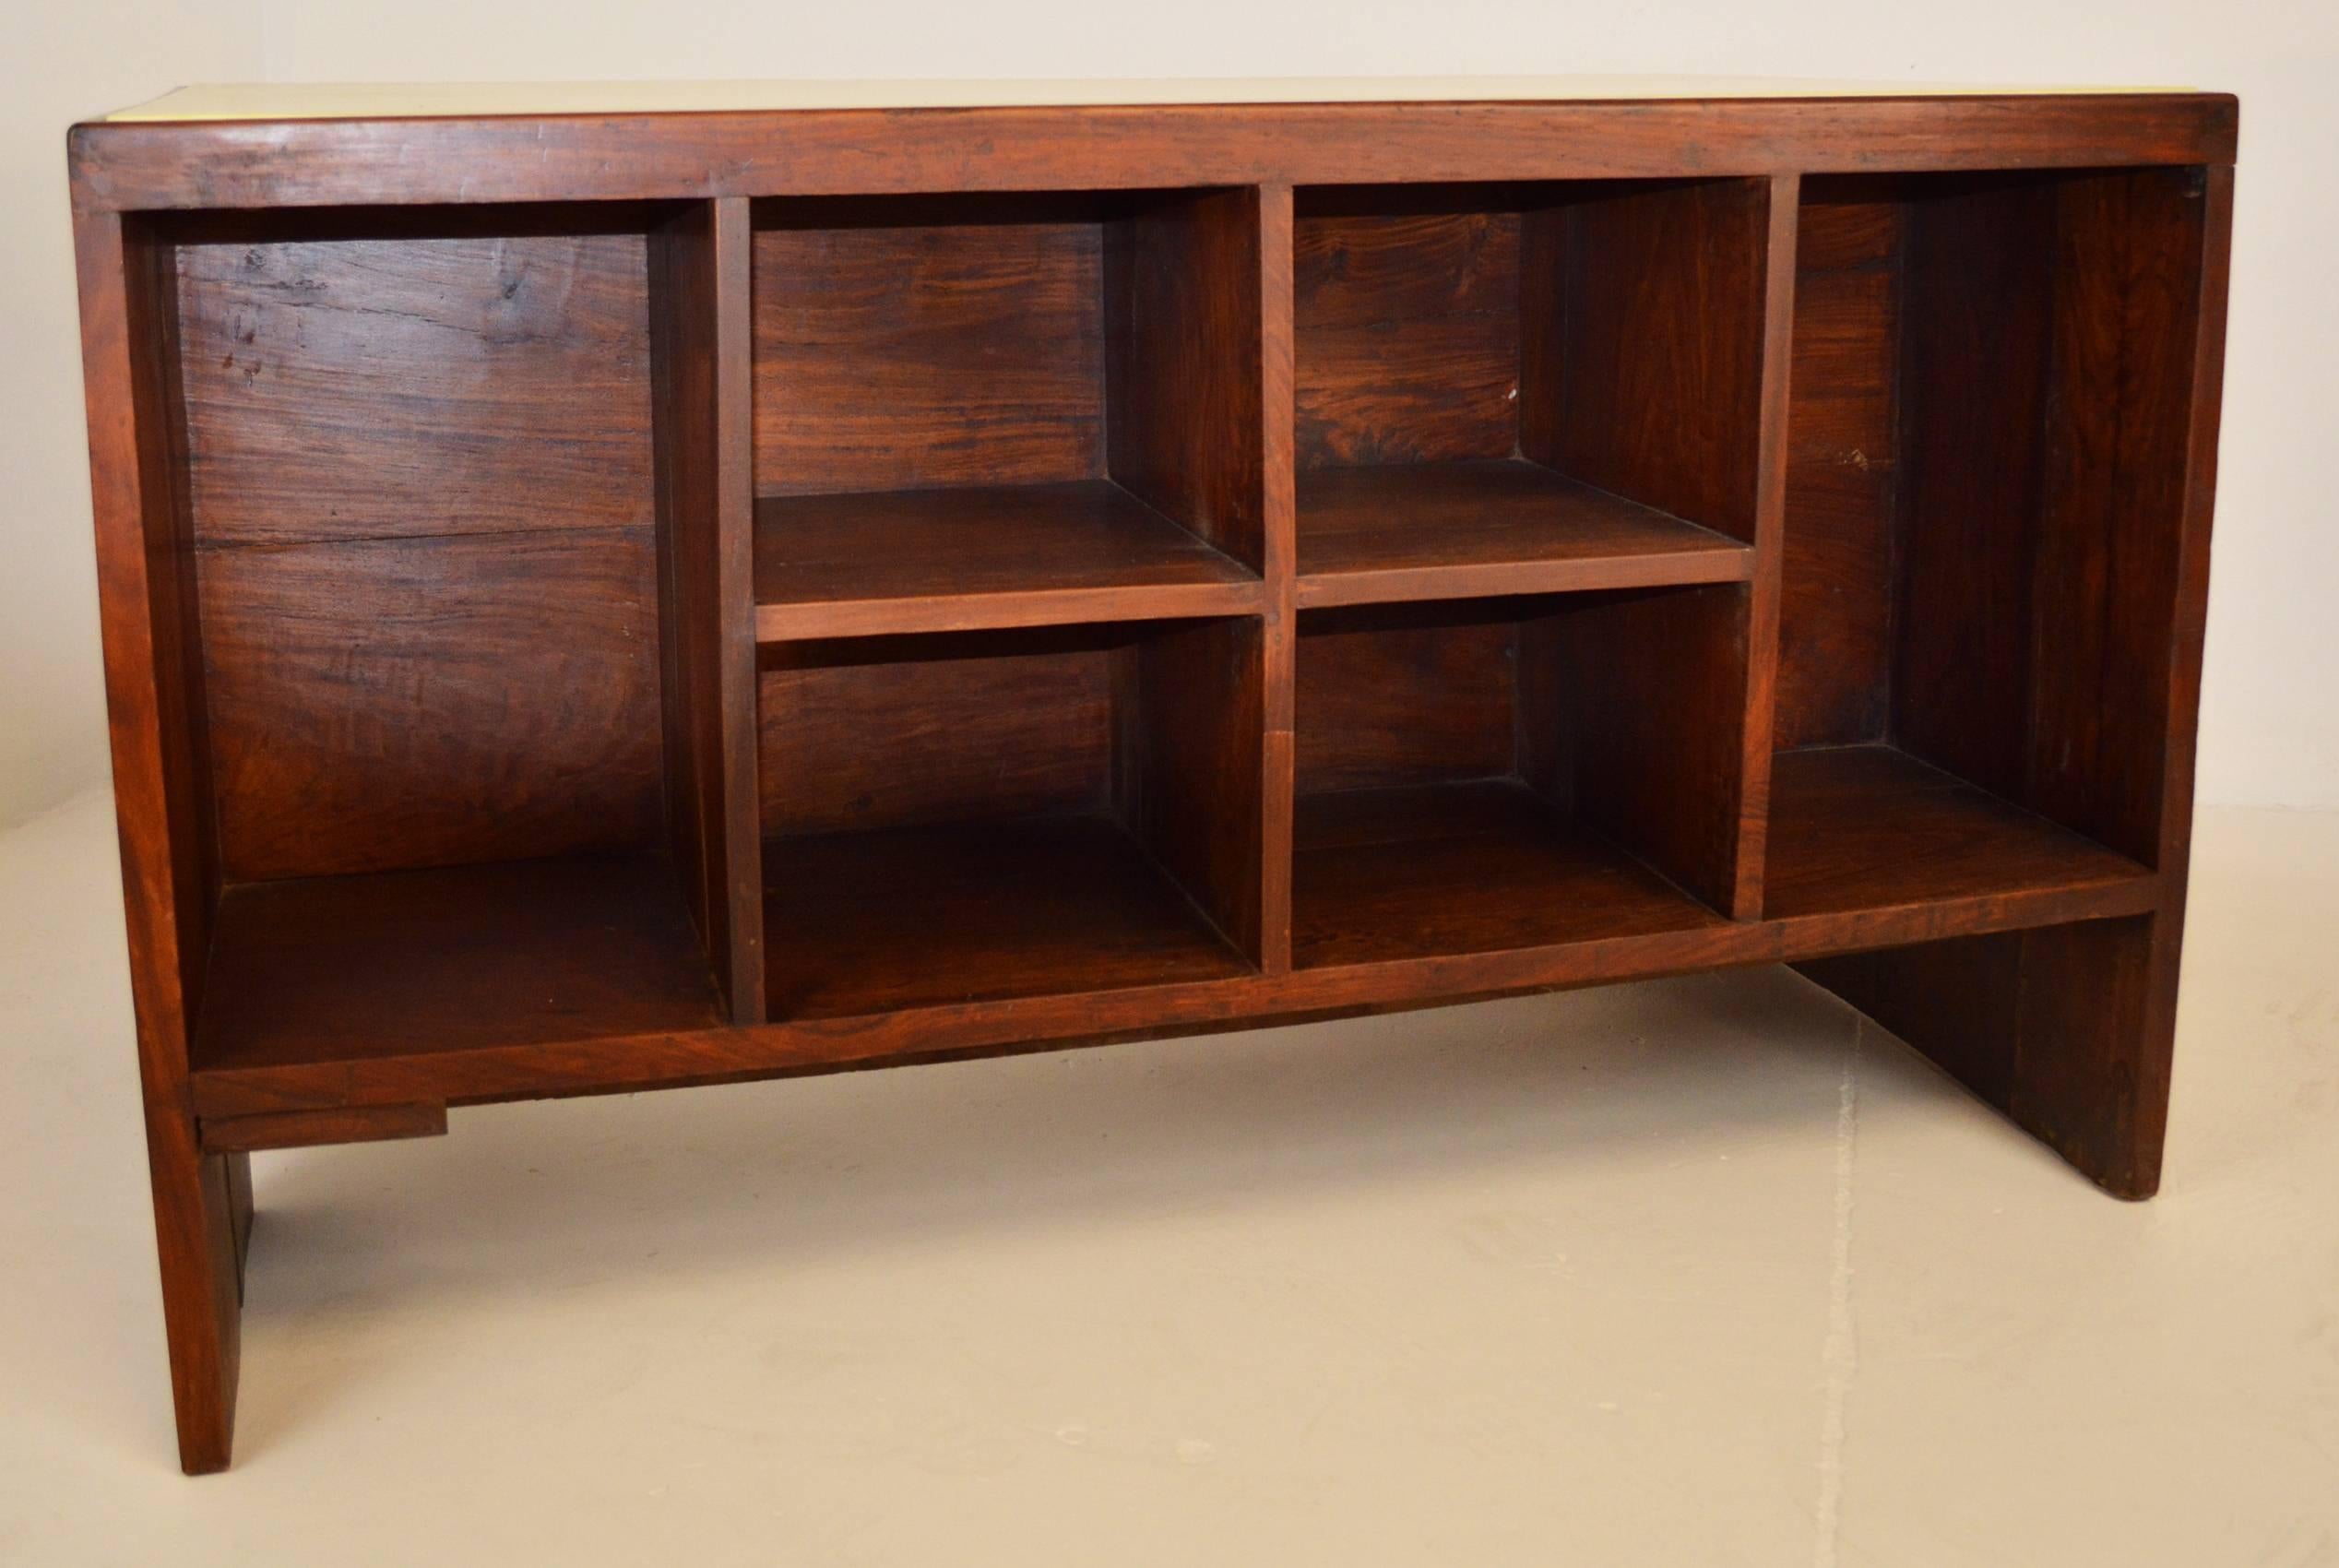 Indian rosewood desk by Pierre Jeanneret from Chandigarh, circa 1957-1958. Kneehole desk with an open cubby and drawer, and a bookcase on the opposite side.
 Leather top has been replaced at some point. From the Secretariat building (1958). Model